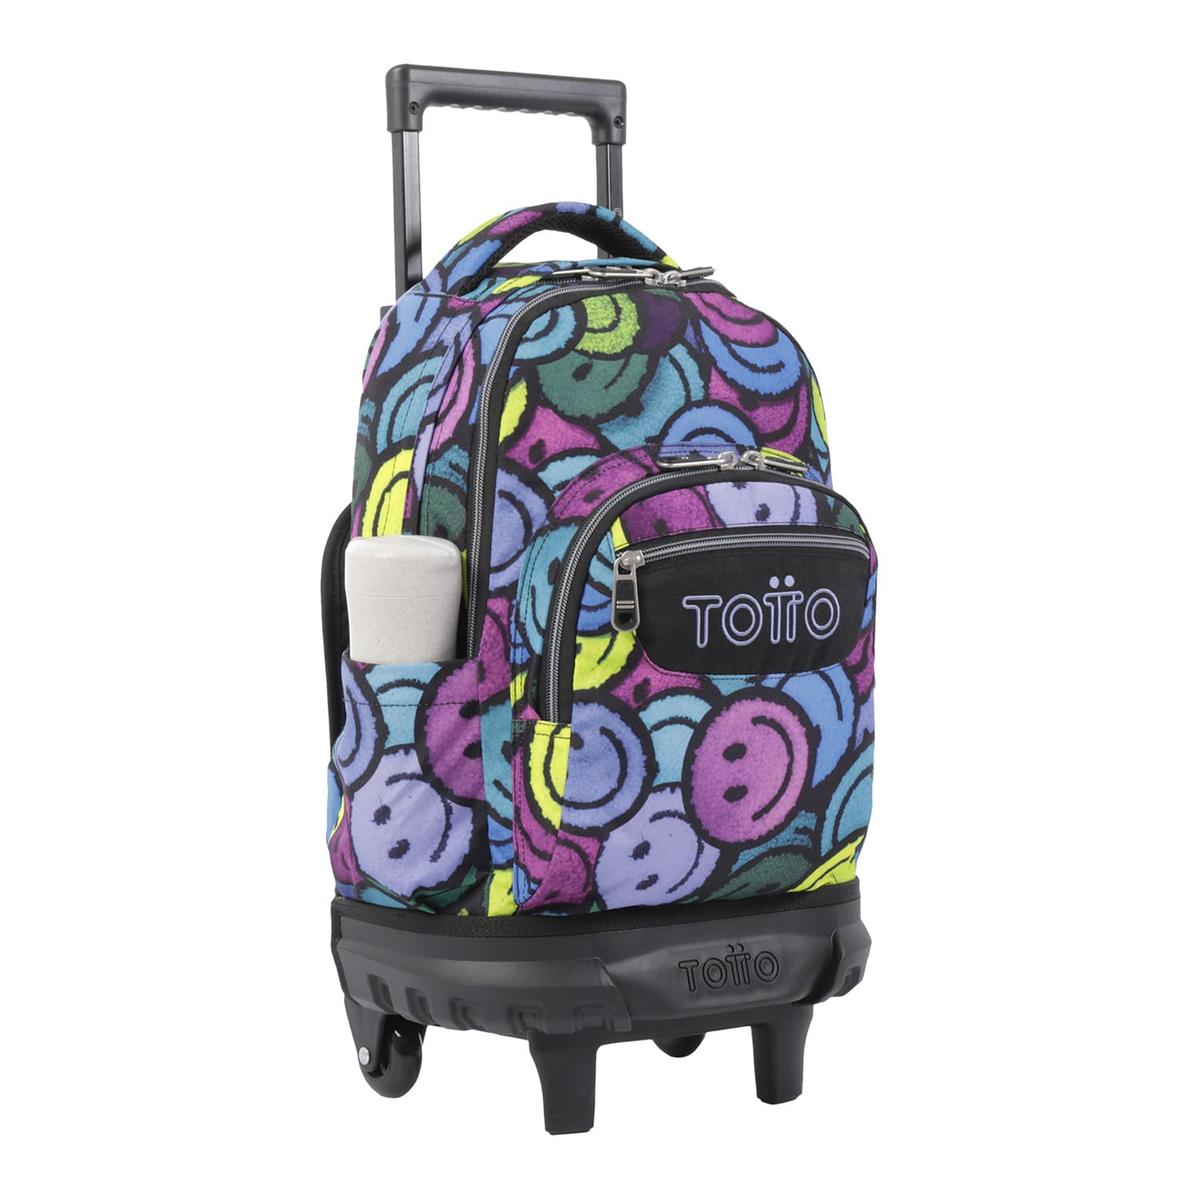 Totto Small School Backpack with Wheels - Emojis Resma